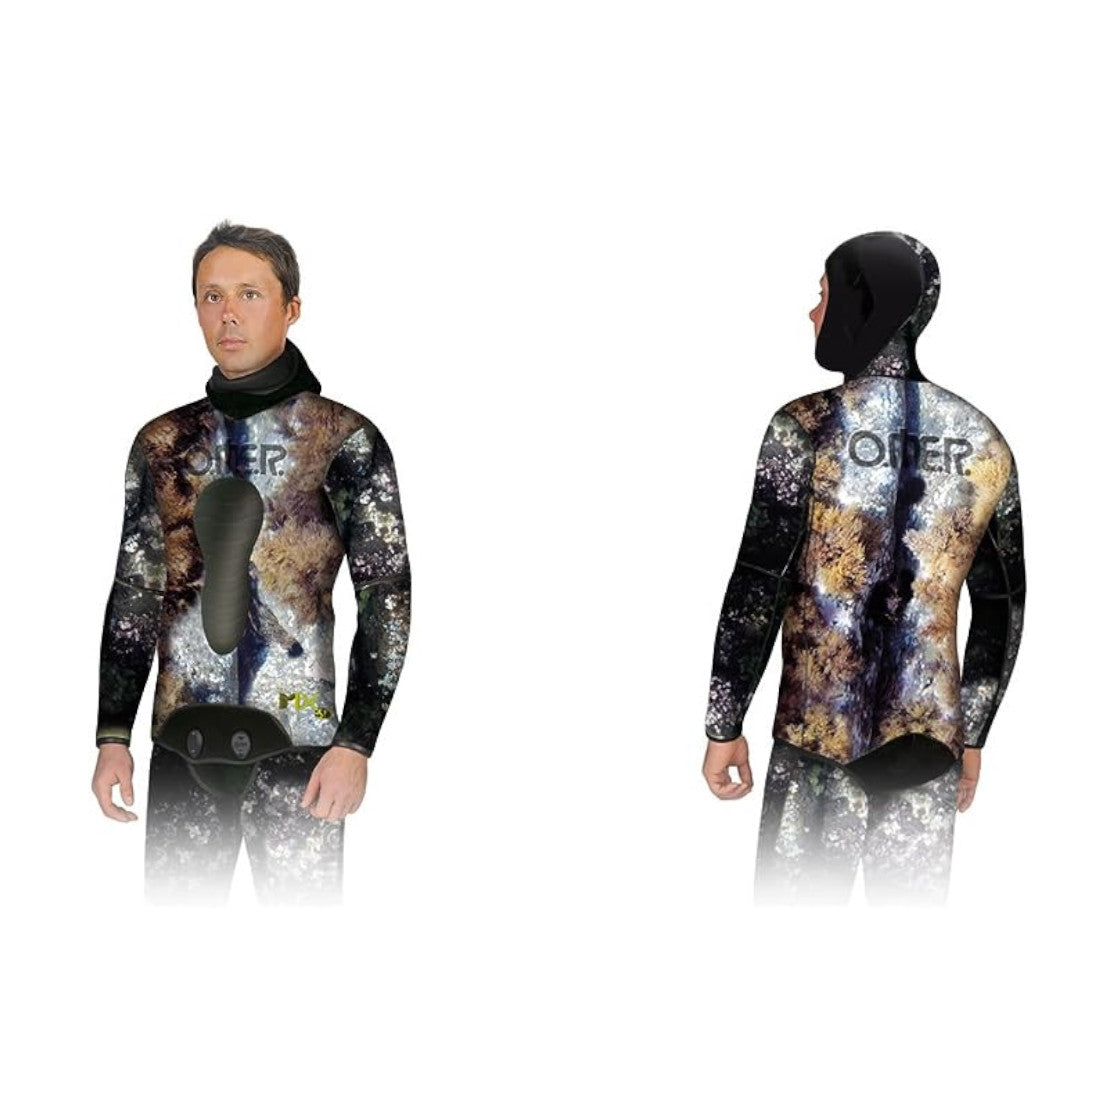 Omer 5mm Mix 3D Camouflage Freediving & Spearfishing Wetsuits - Top and Bottom - Top Only / 2